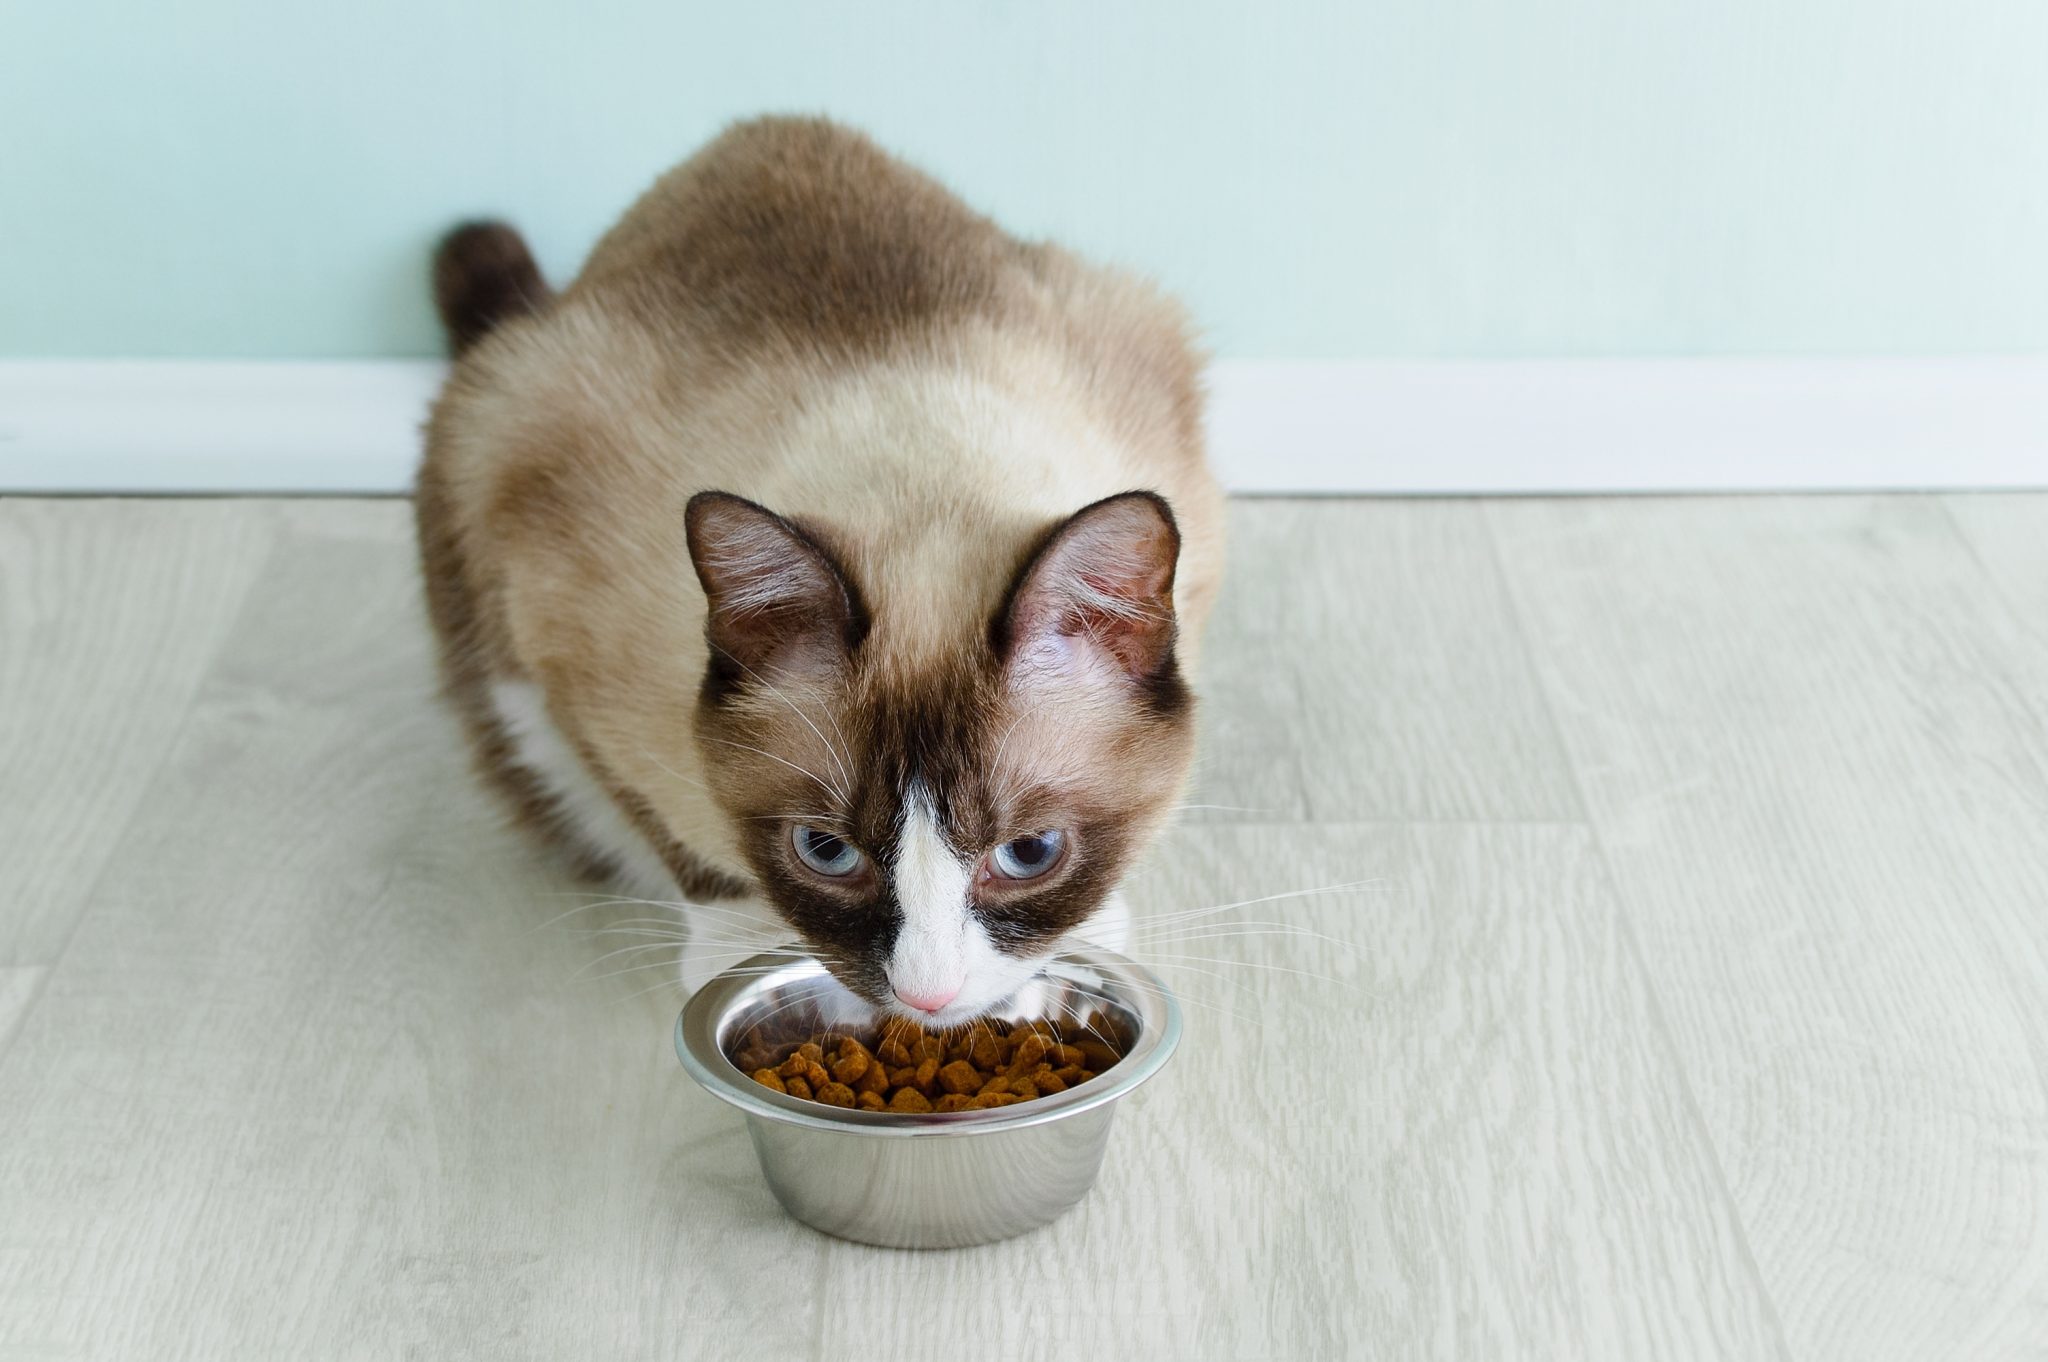 Snowshoe cat breed sitting on the floor and eating from a bowl of dry cat food